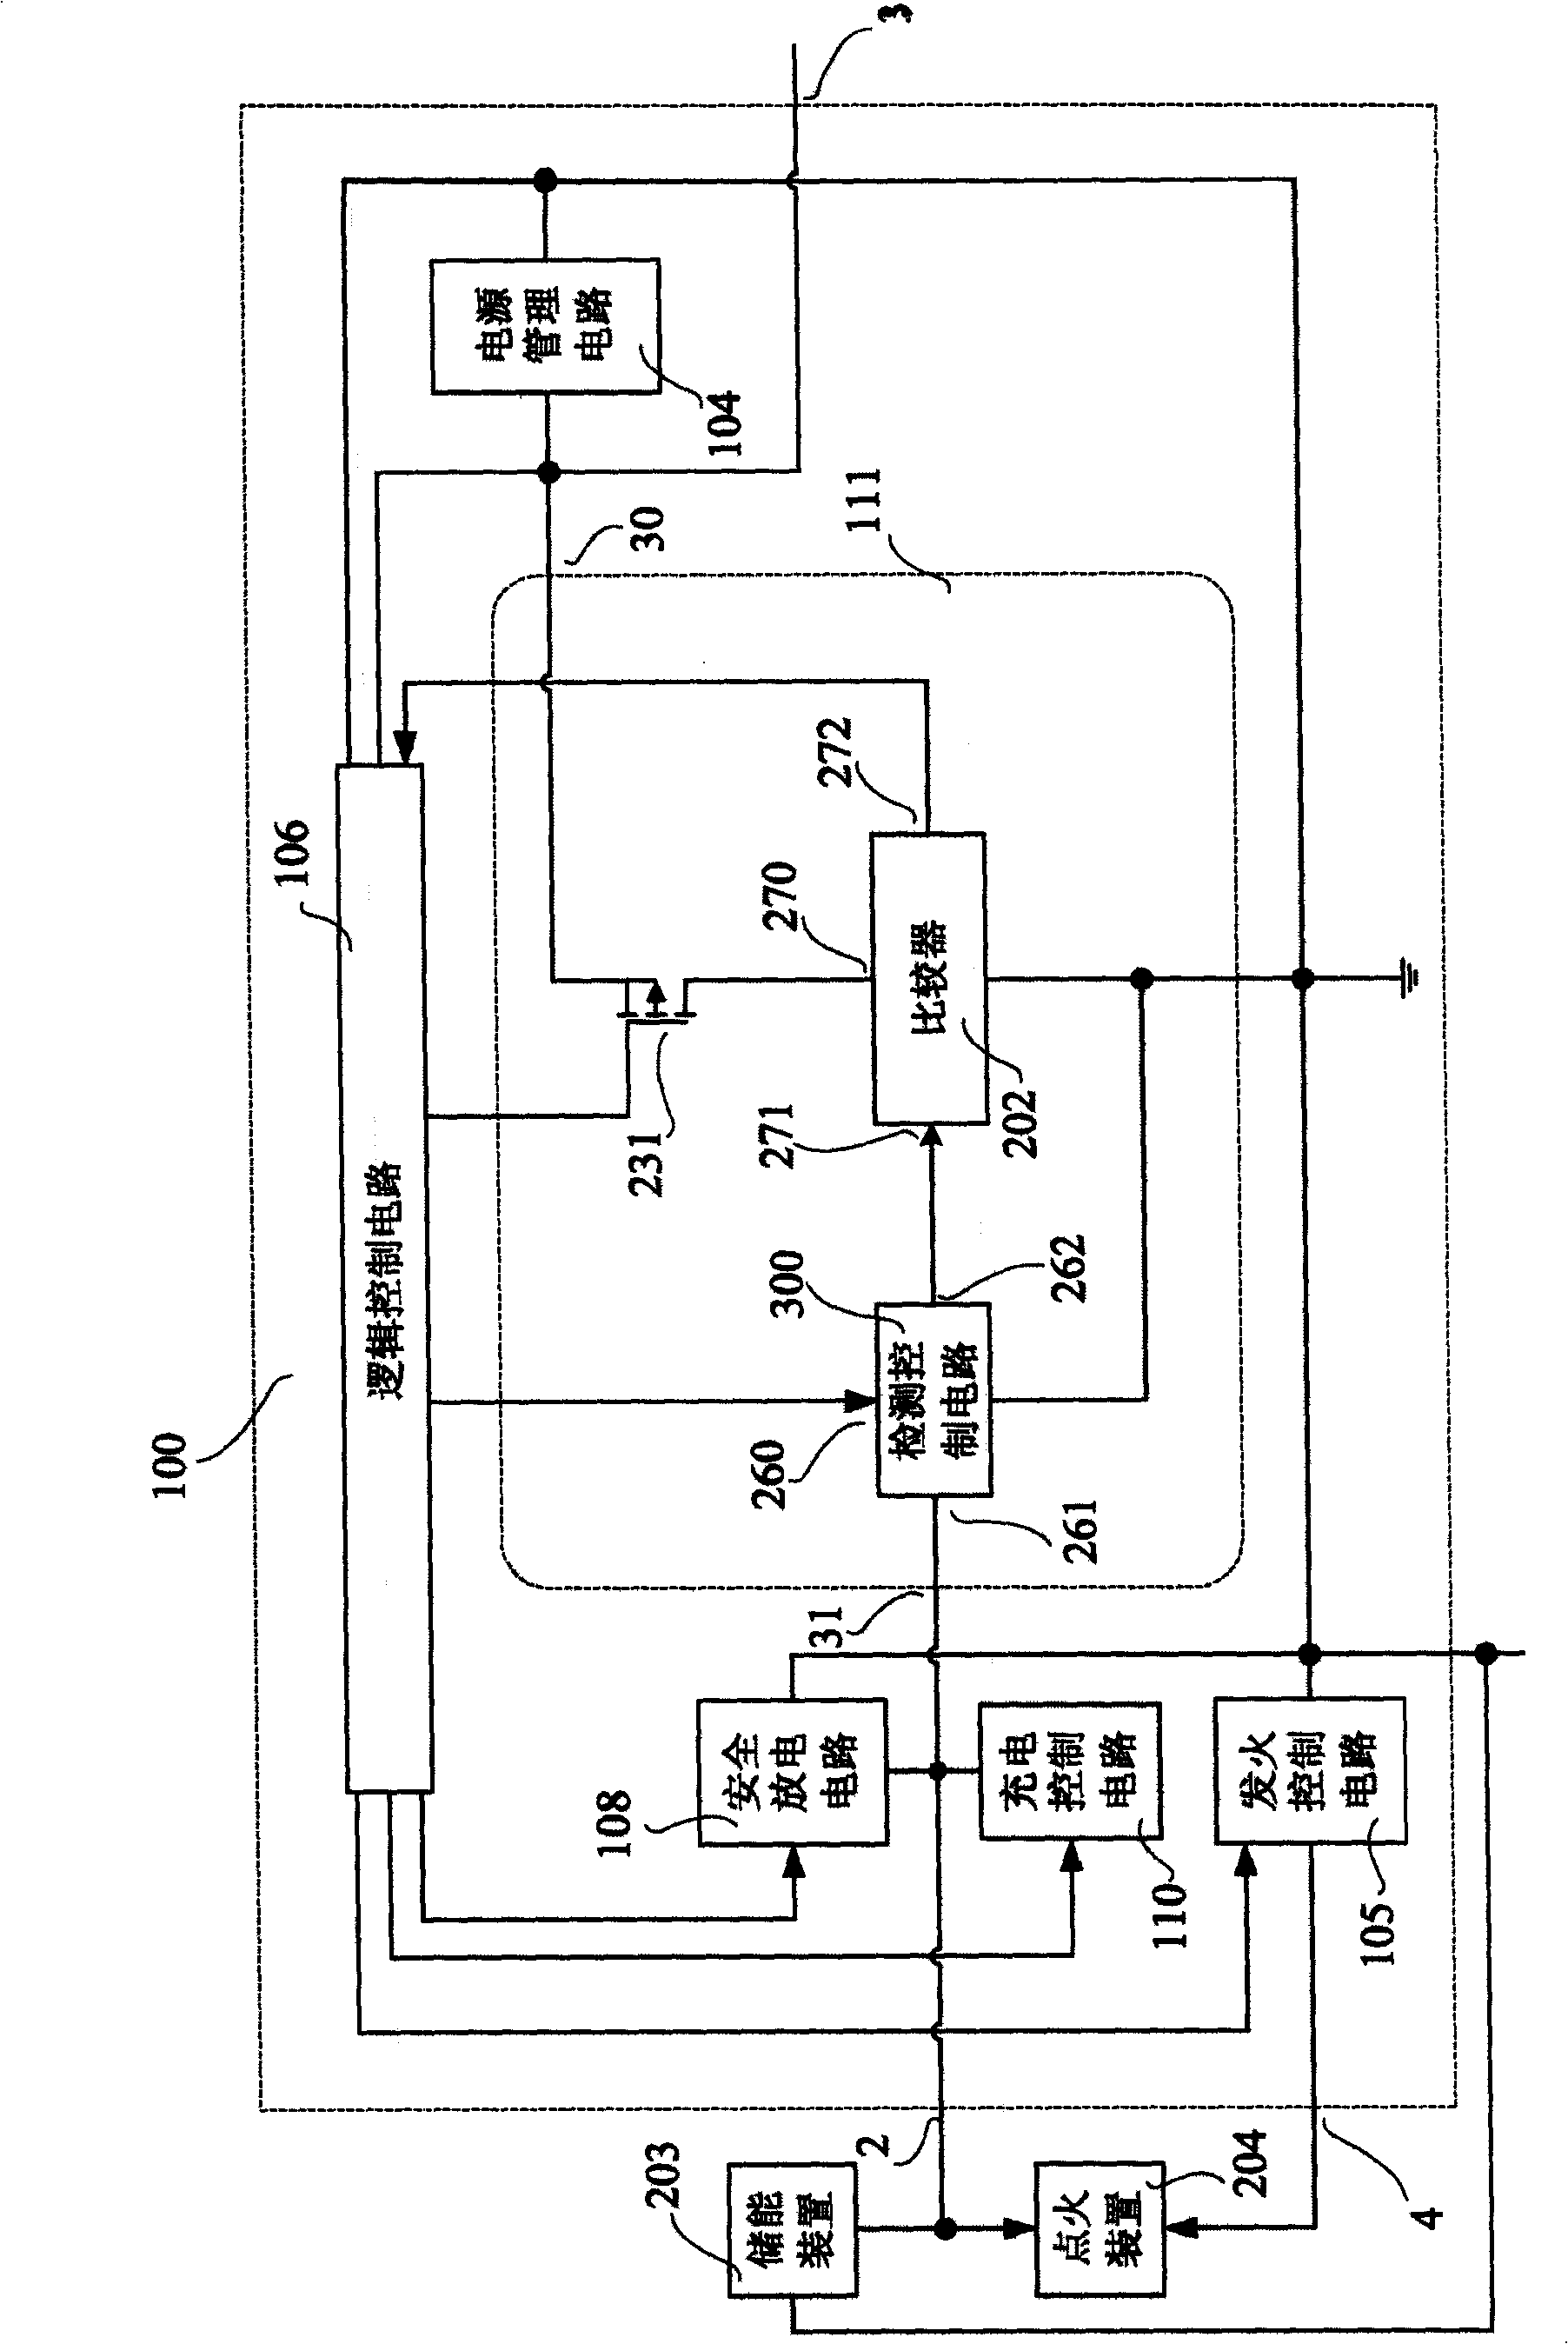 Electronic detonator control chip and its connection reliability checking method